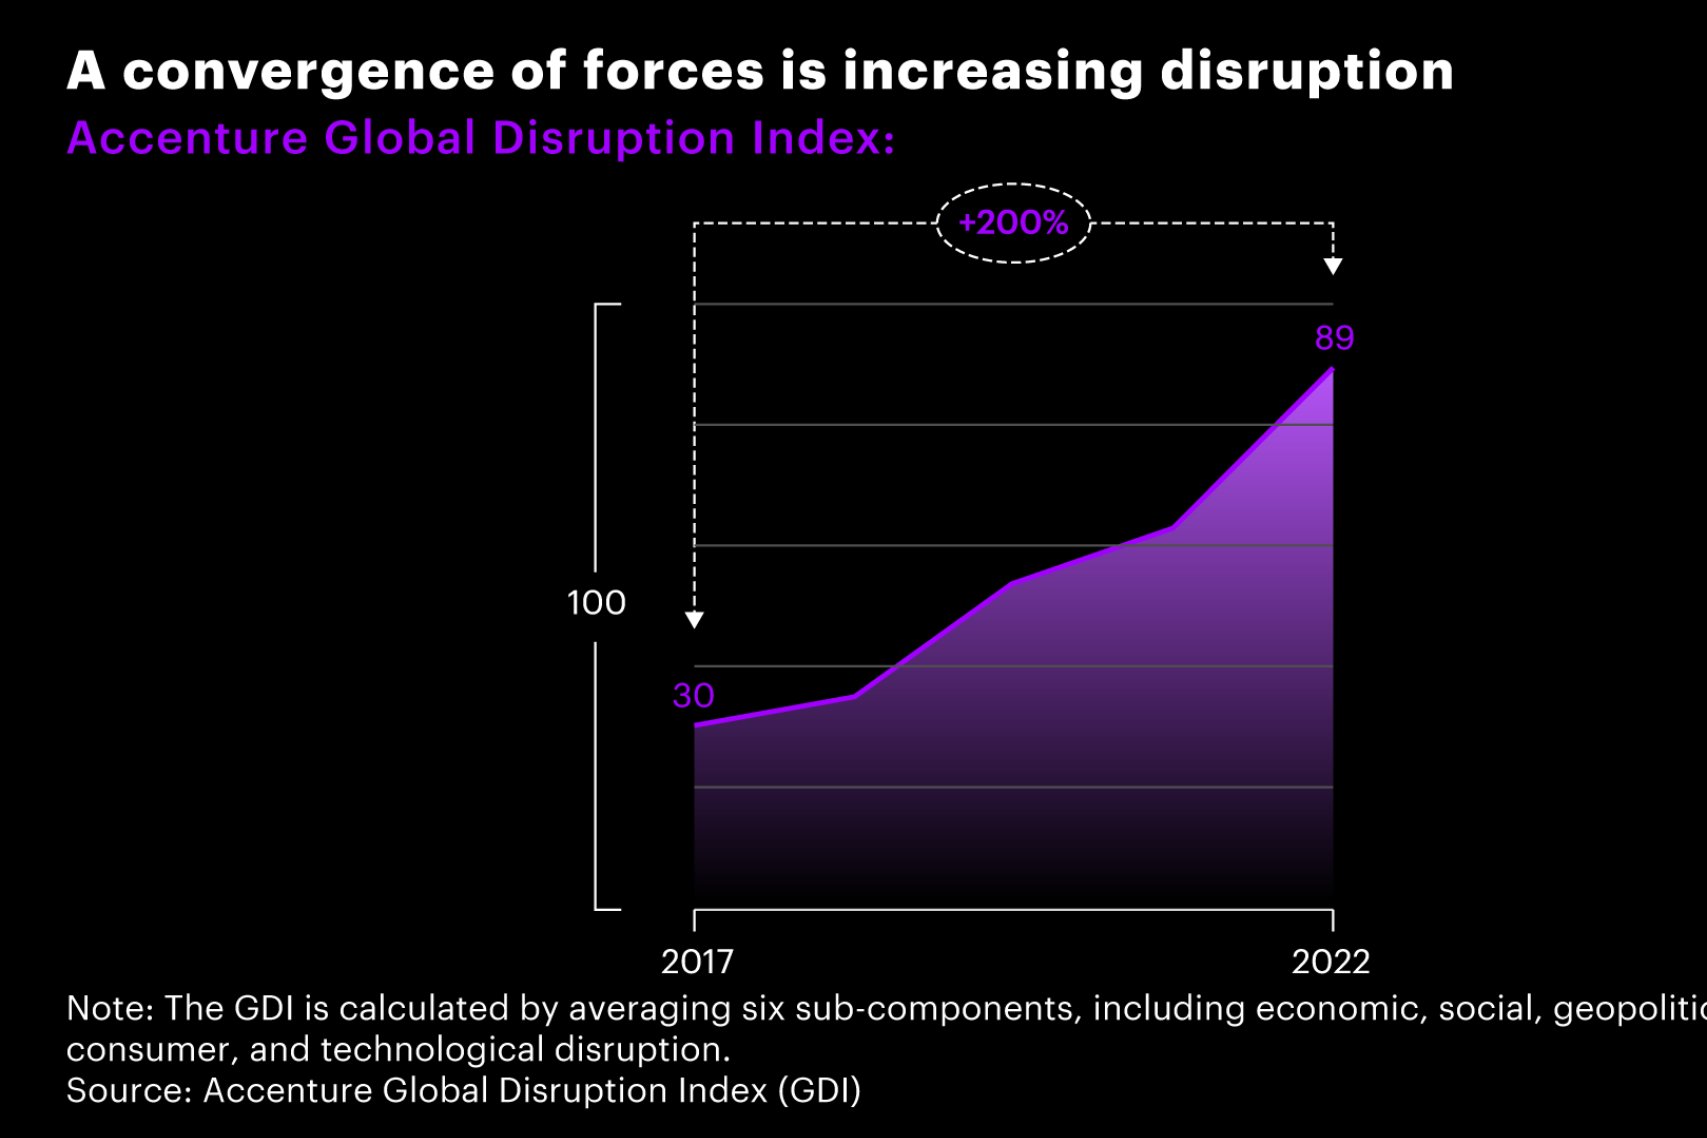 A convergence of forces is increasing disruption